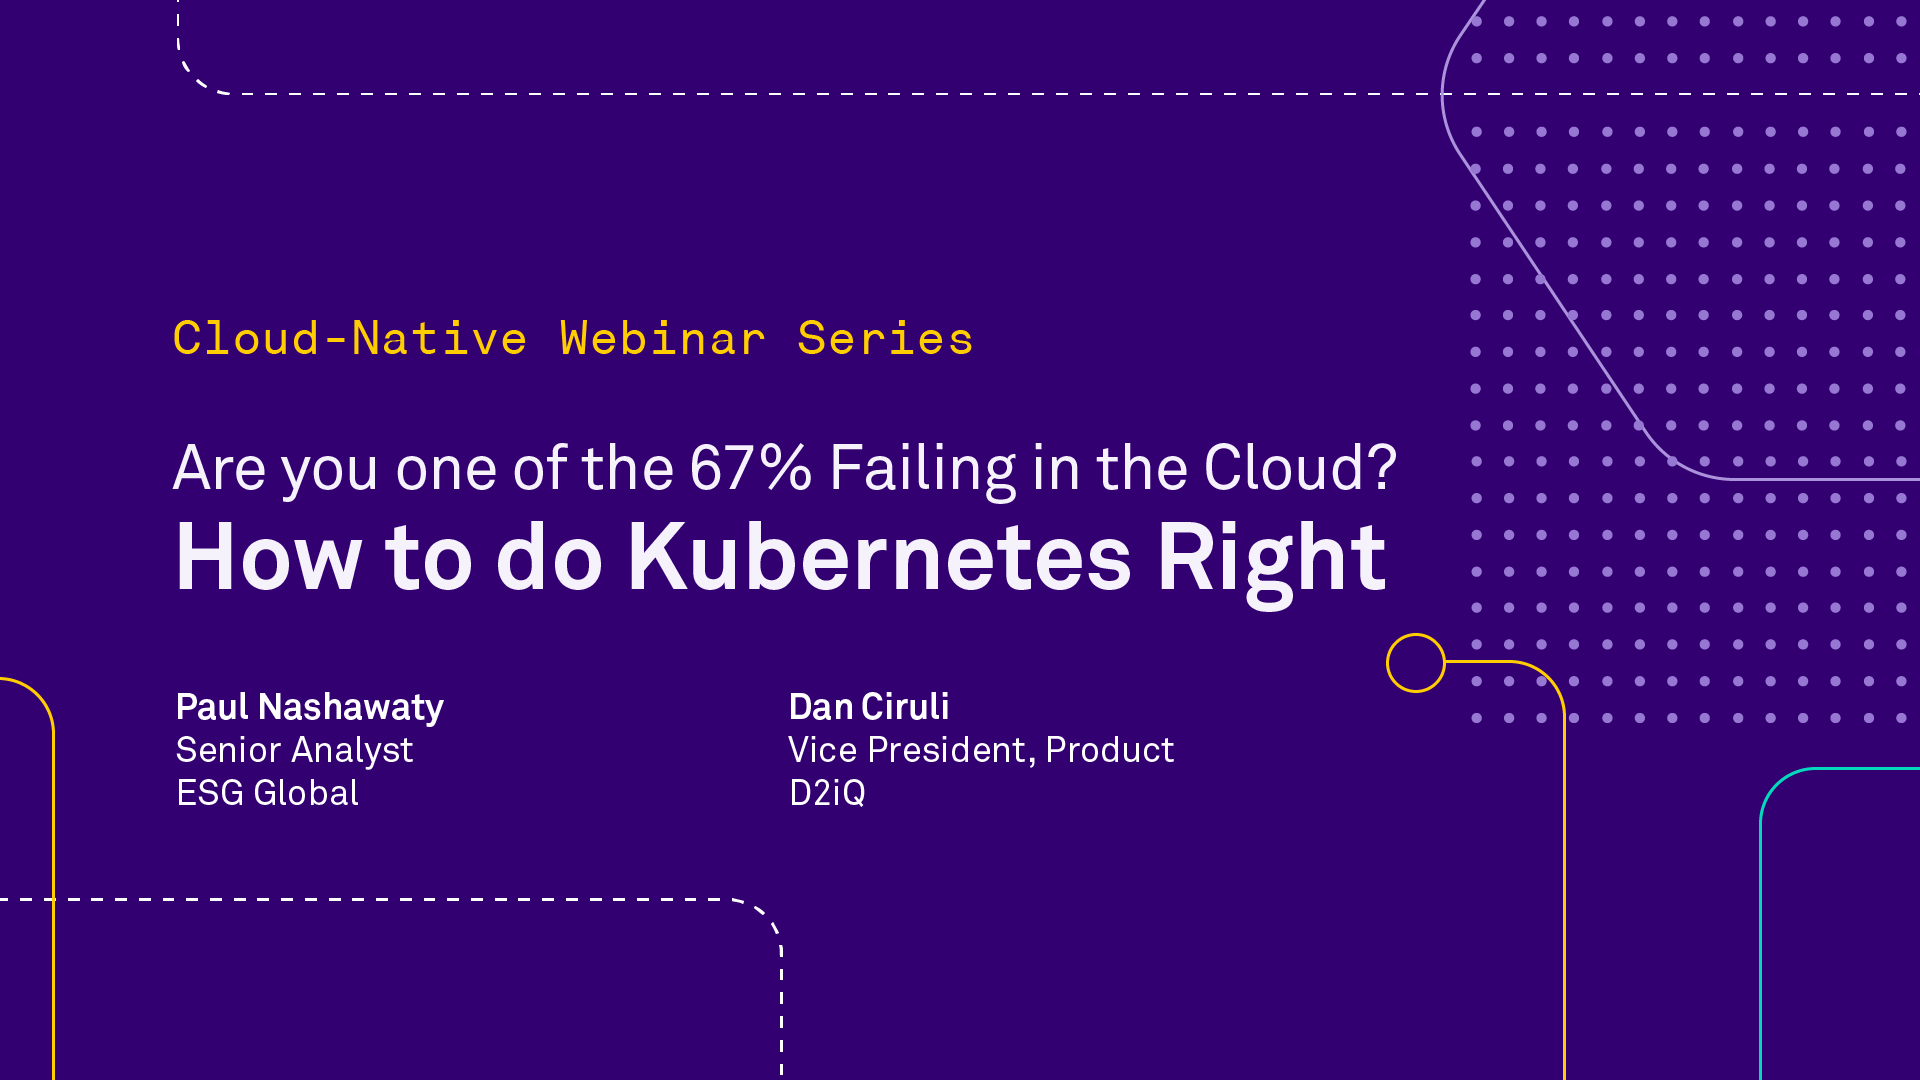 Are You One of the 67% Failing in the Cloud? How to Do Kubernetes Right